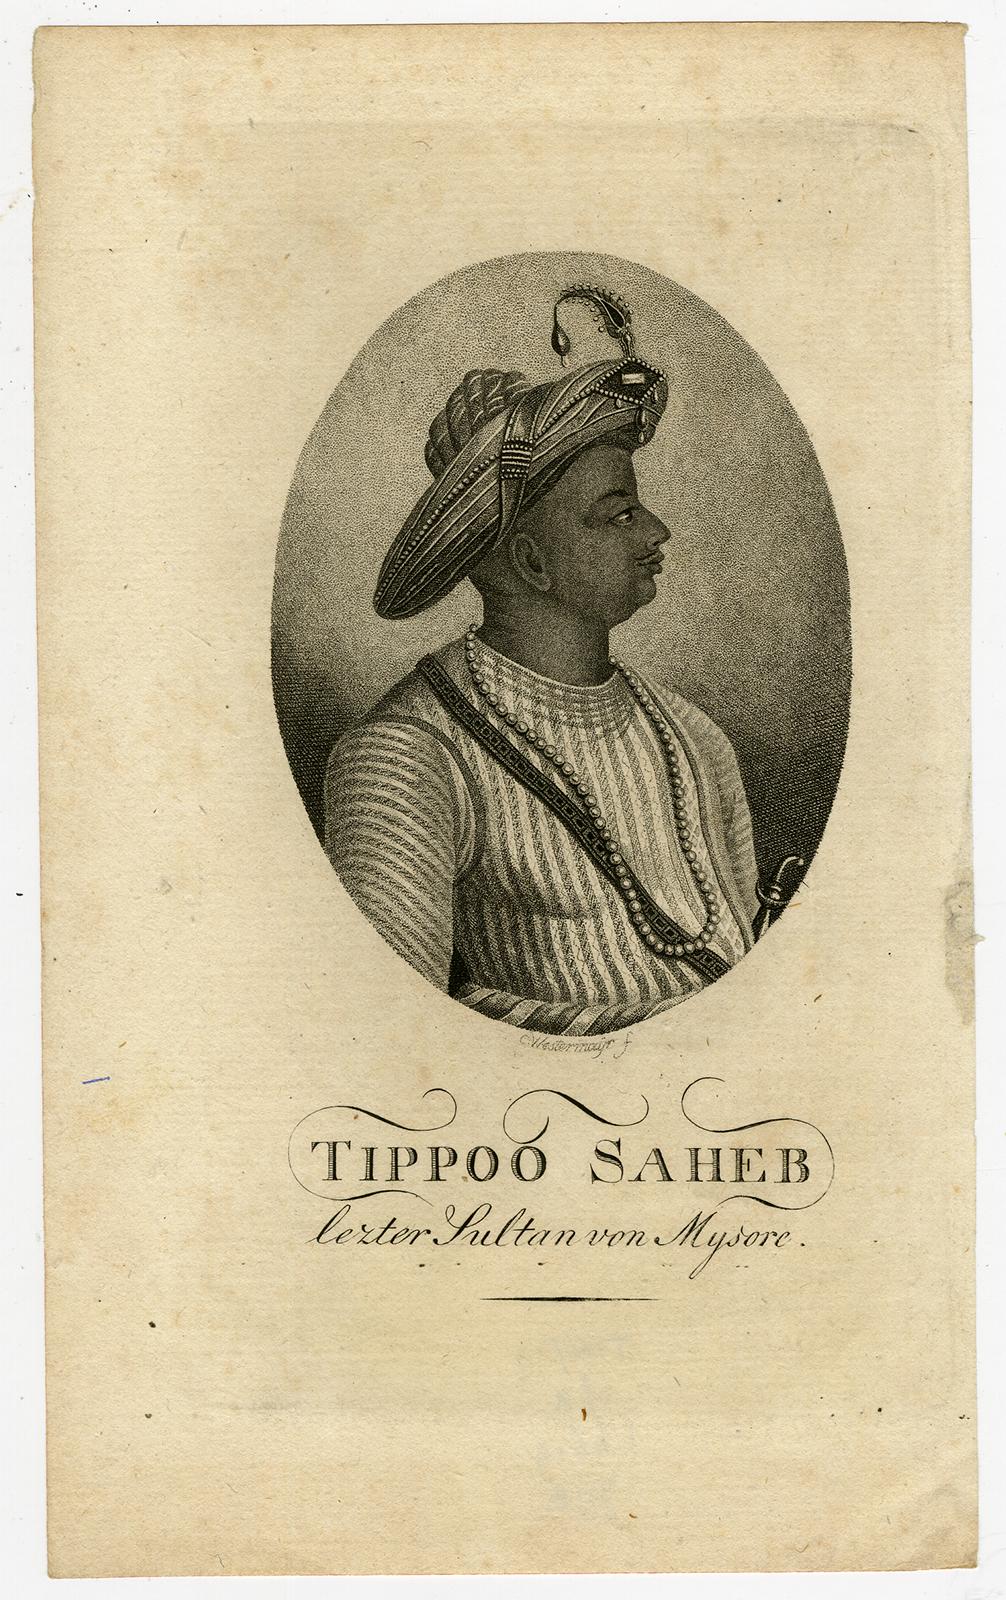 Subject:  Antique print, titled: 'Tippoo Saheb, letzter Sultan von Mysore' - Portrait of Tipu Sahib, ""the tiger of Mysore".

Description:  Source unknown, to be determined.

Artists and Engravers:  Made by 'Conrad Westermayr' after own design.